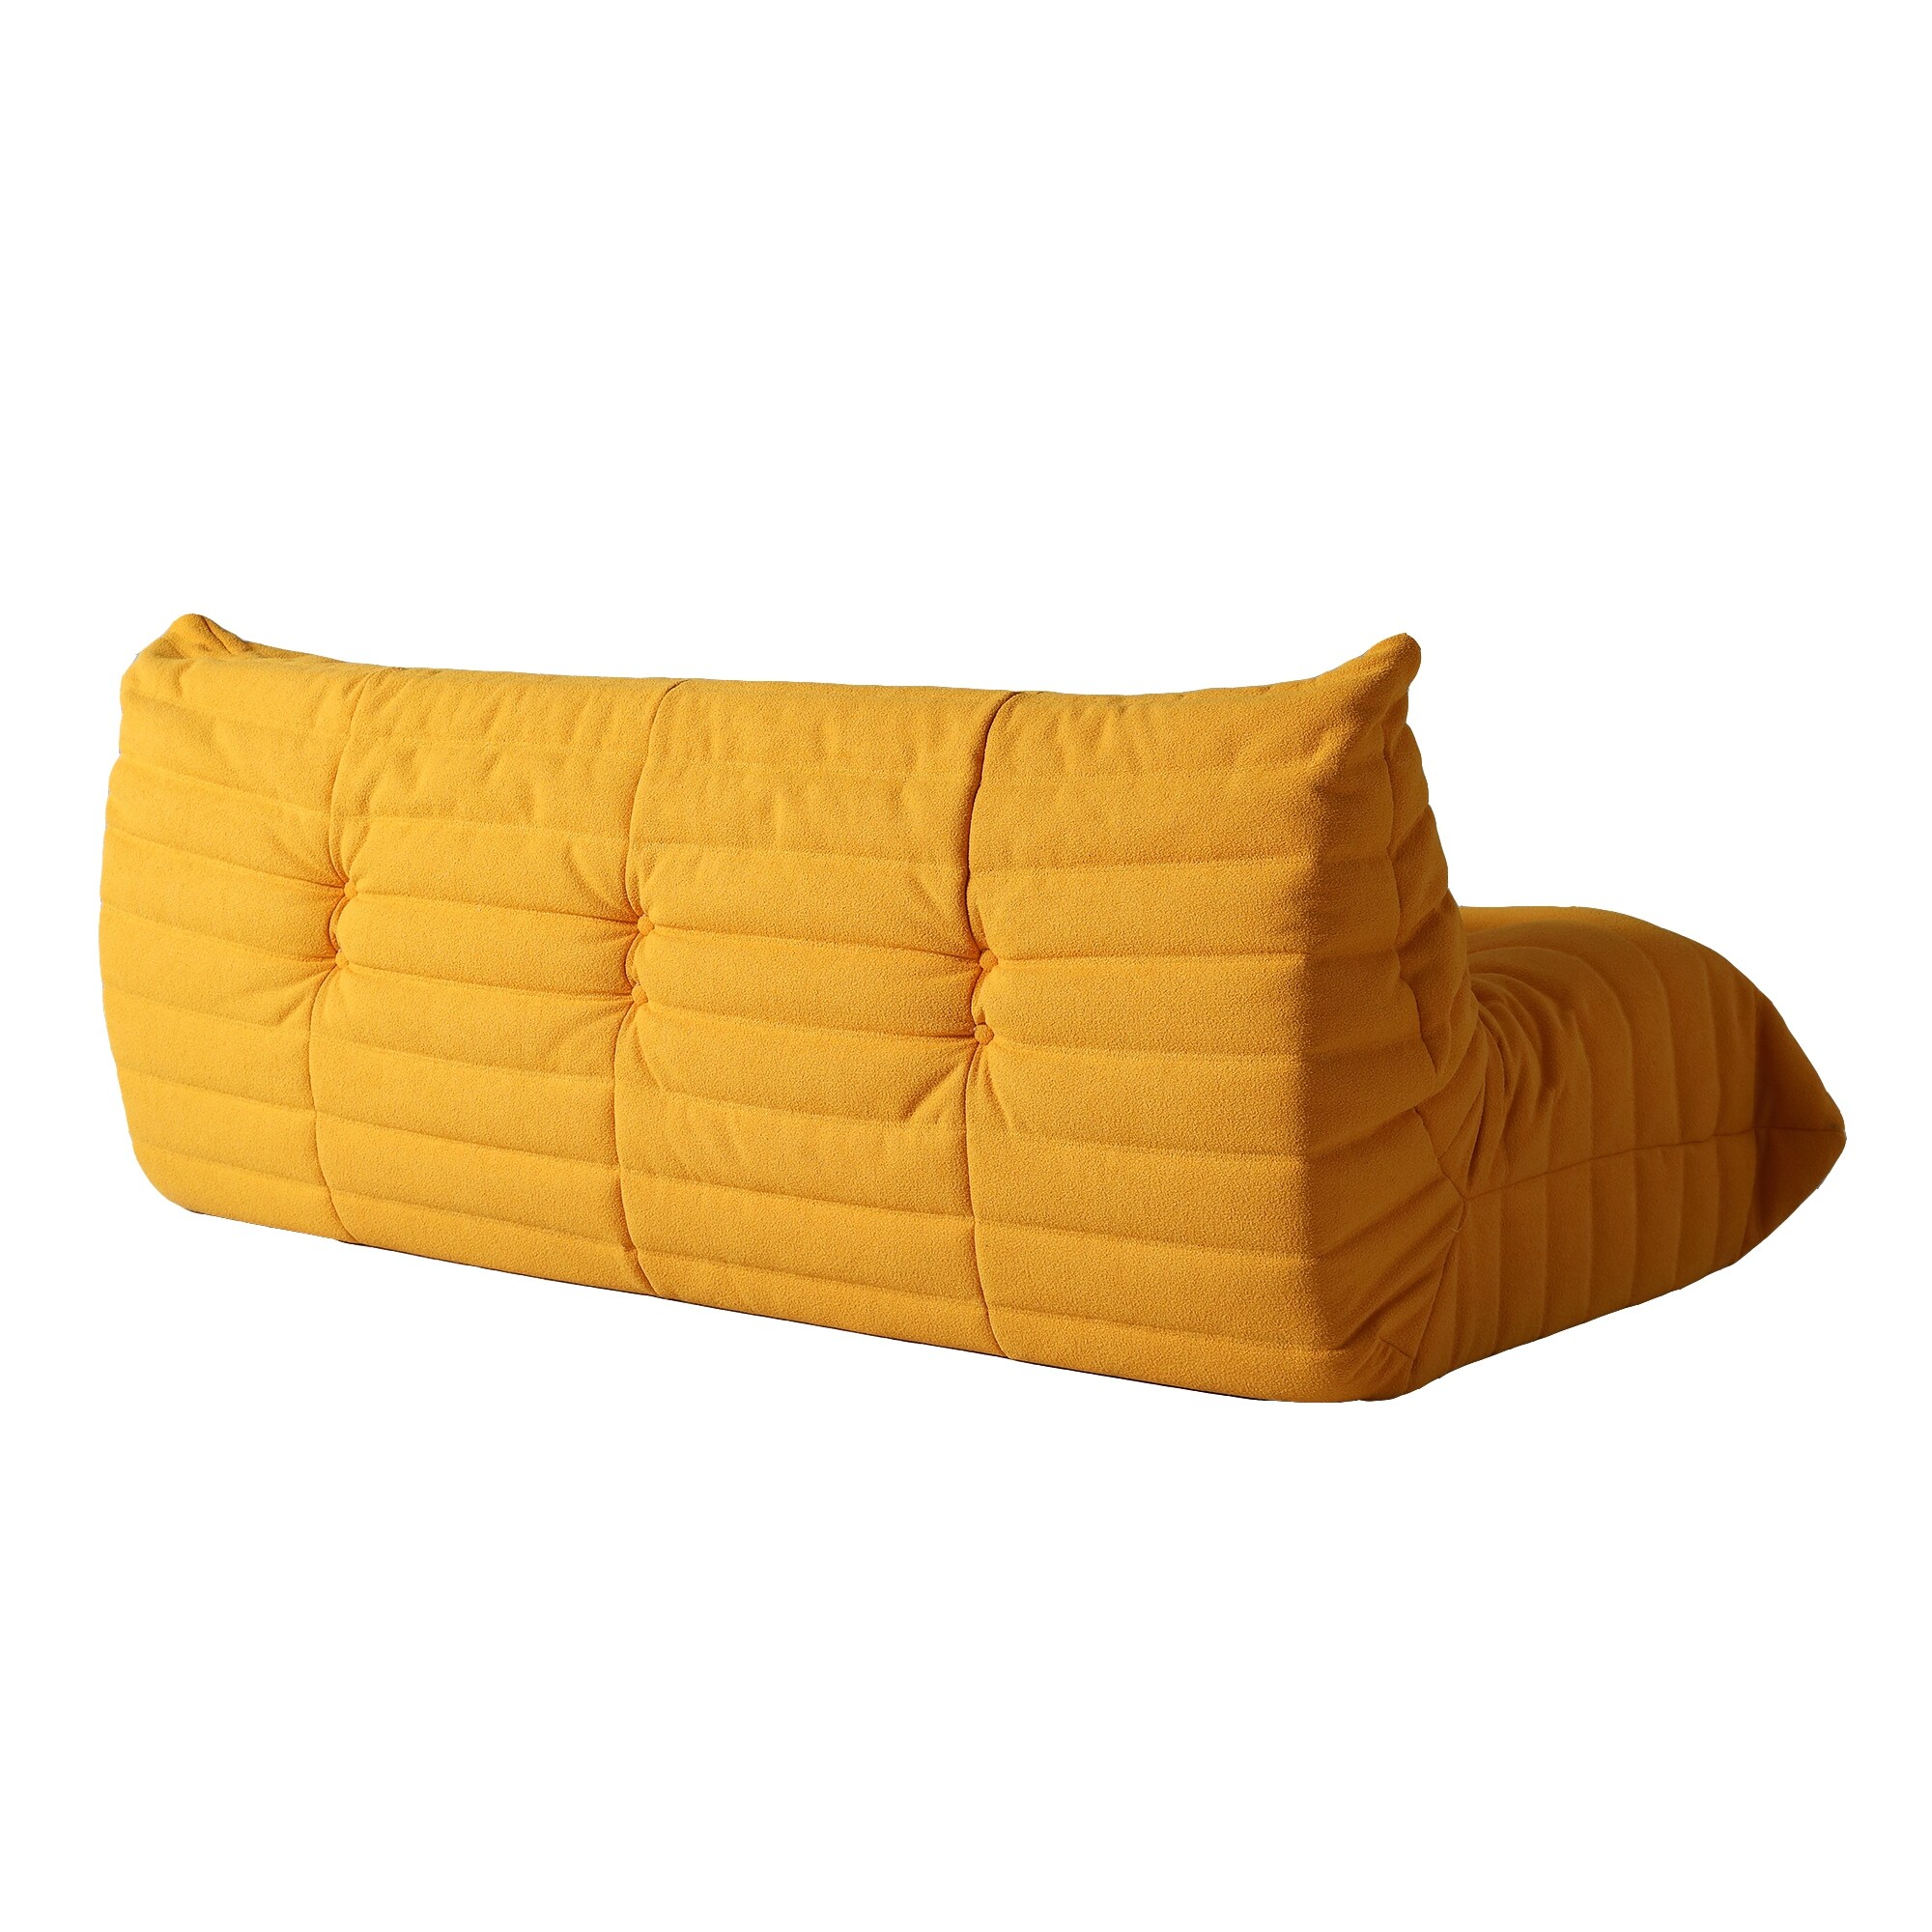 https://ak1.ostkcdn.com/images/products/is/images/direct/27b2c1d87b5ca918177a5183e1755f6f4dbb1b55/Teddy-Velvet-Floor-Couch%2CComfortable-Back-Support-Lazy-Sofa-with-Ottoman.jpg